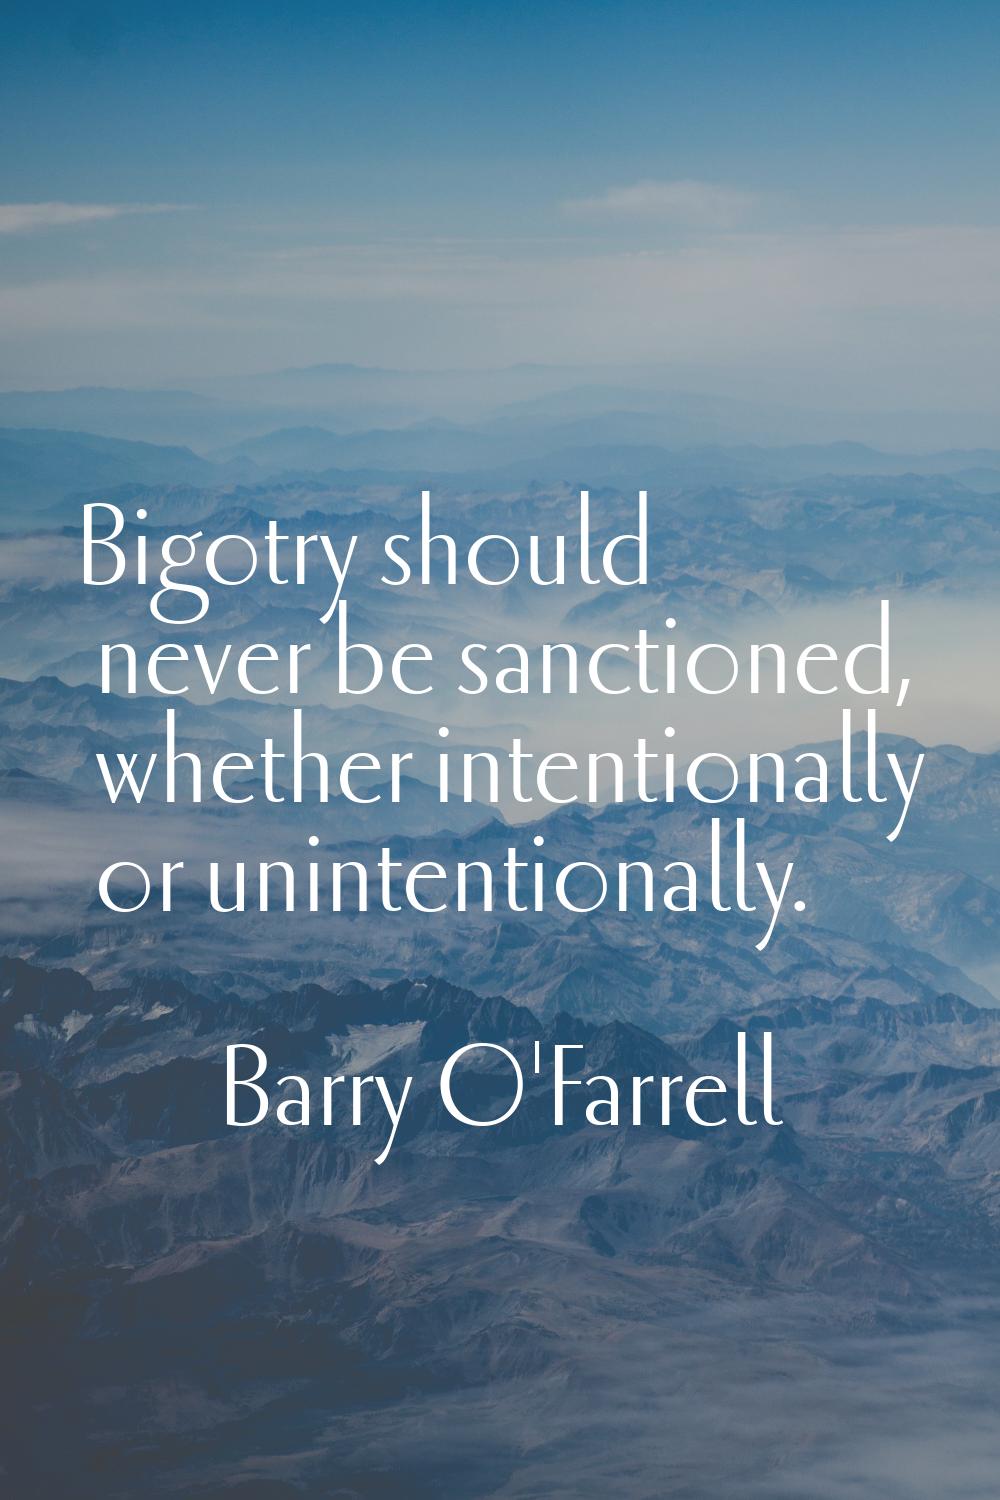 Bigotry should never be sanctioned, whether intentionally or unintentionally.